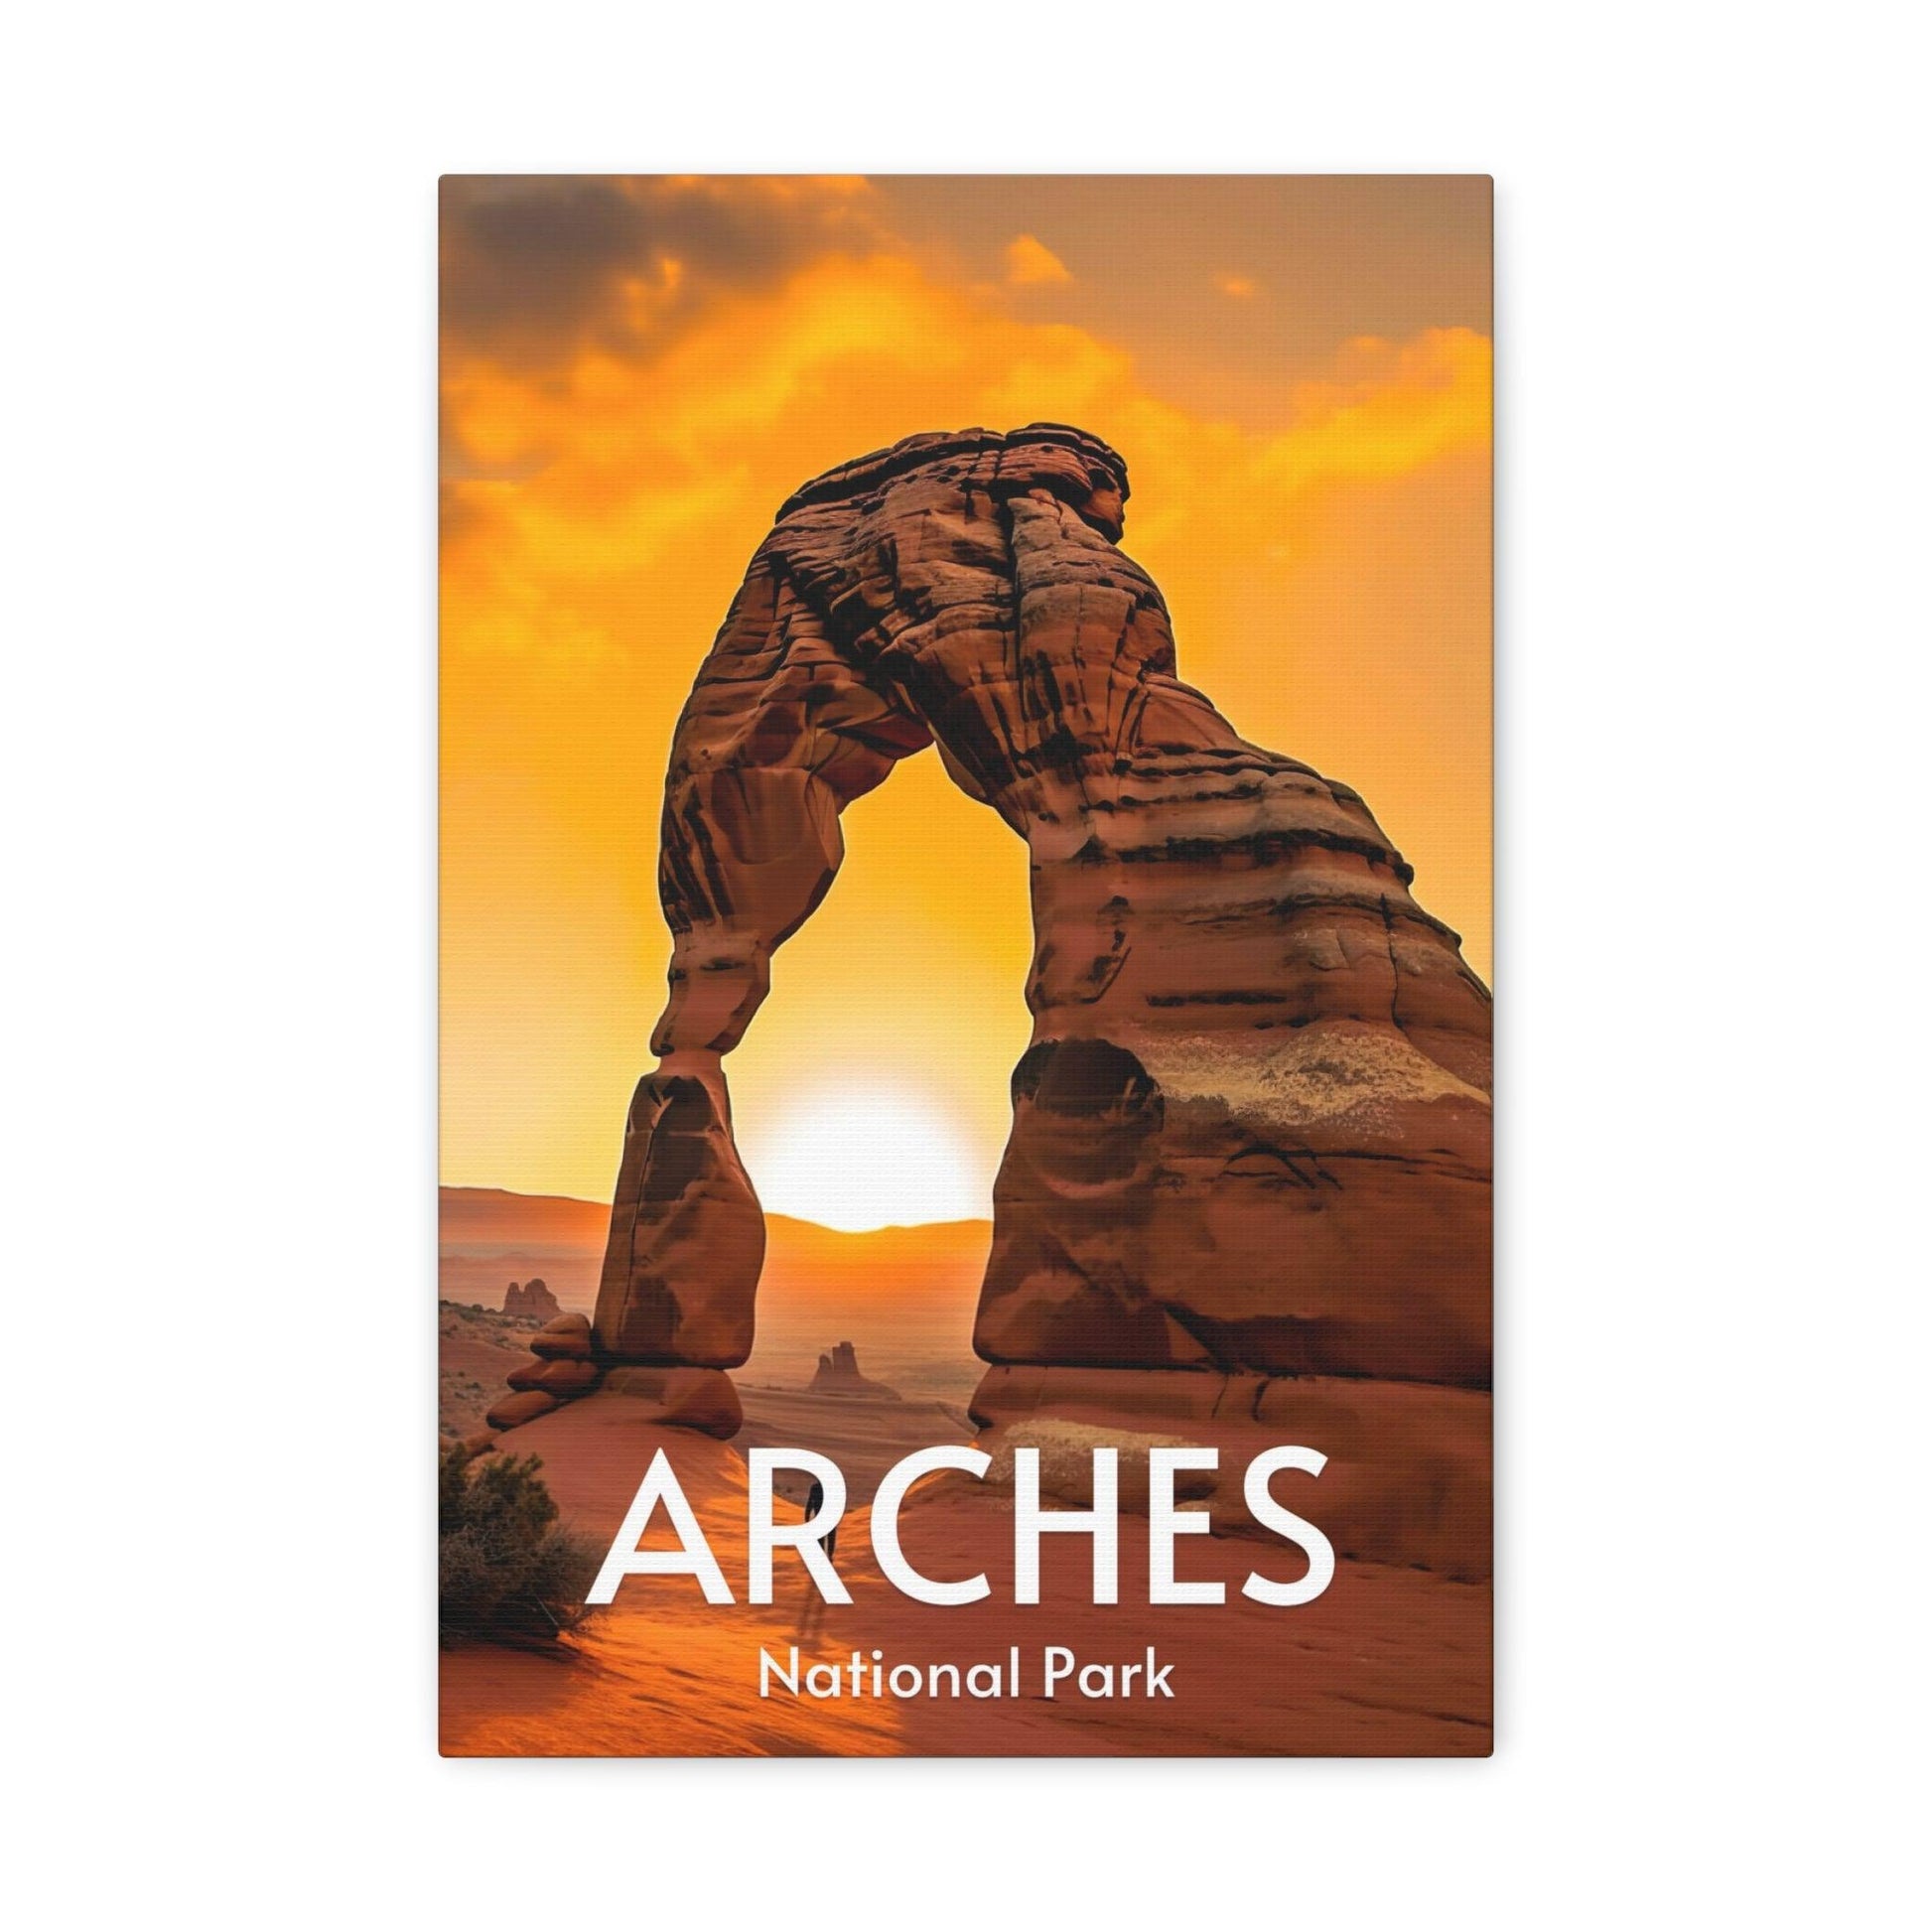 Arches National Park Canvas, Delicate Arch at sunset